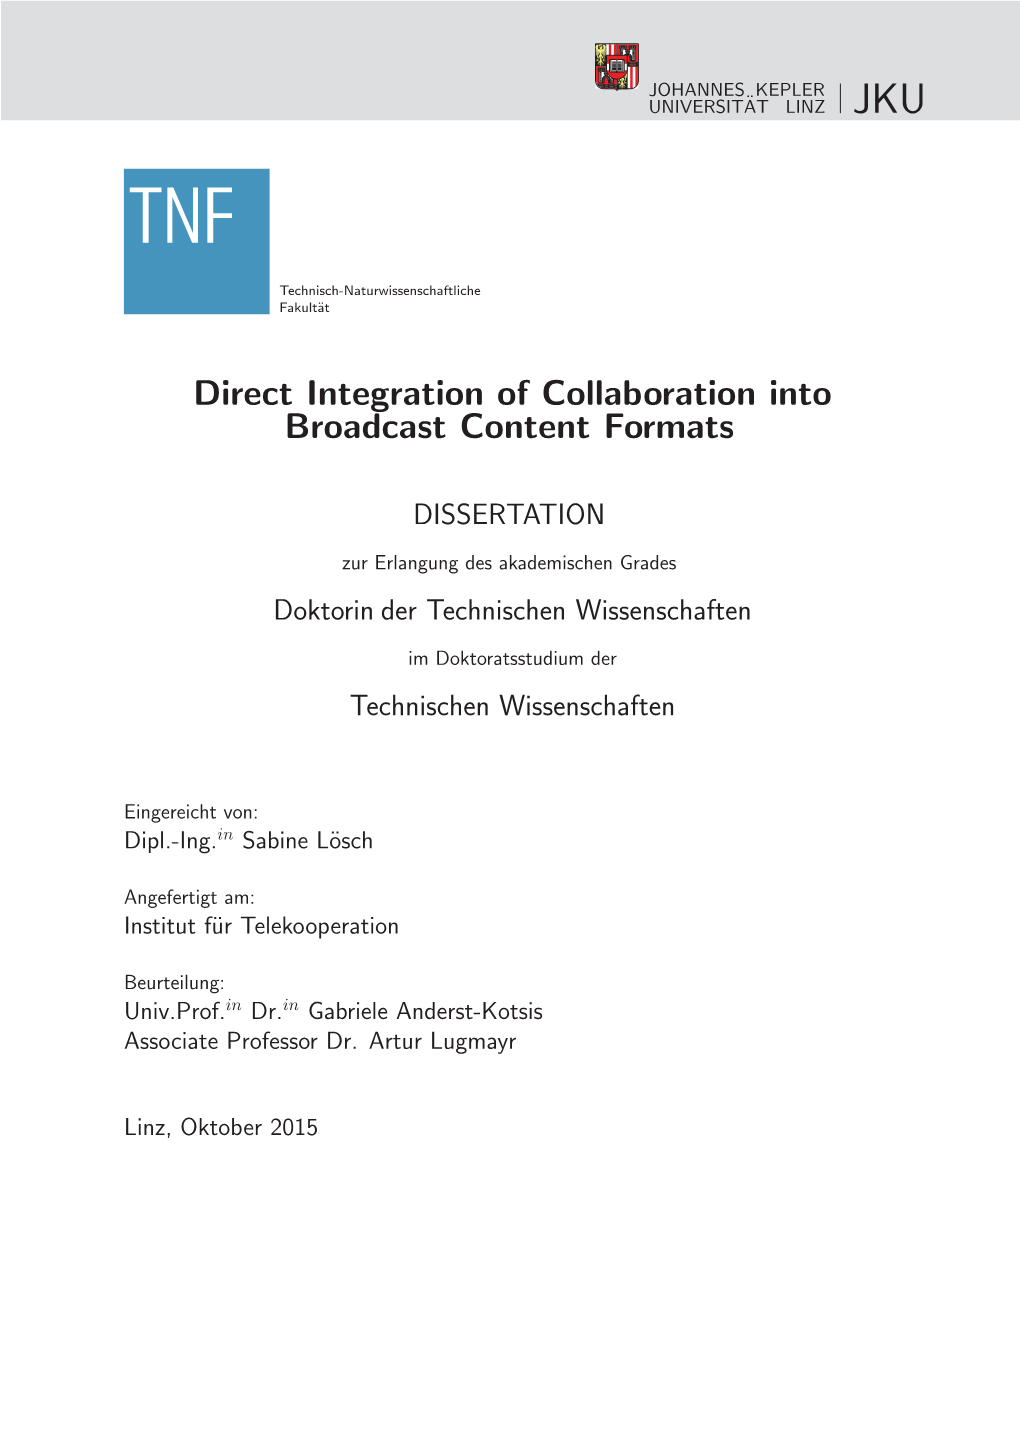 Direct Integration of Collaboration Into Broadcast Content Formats